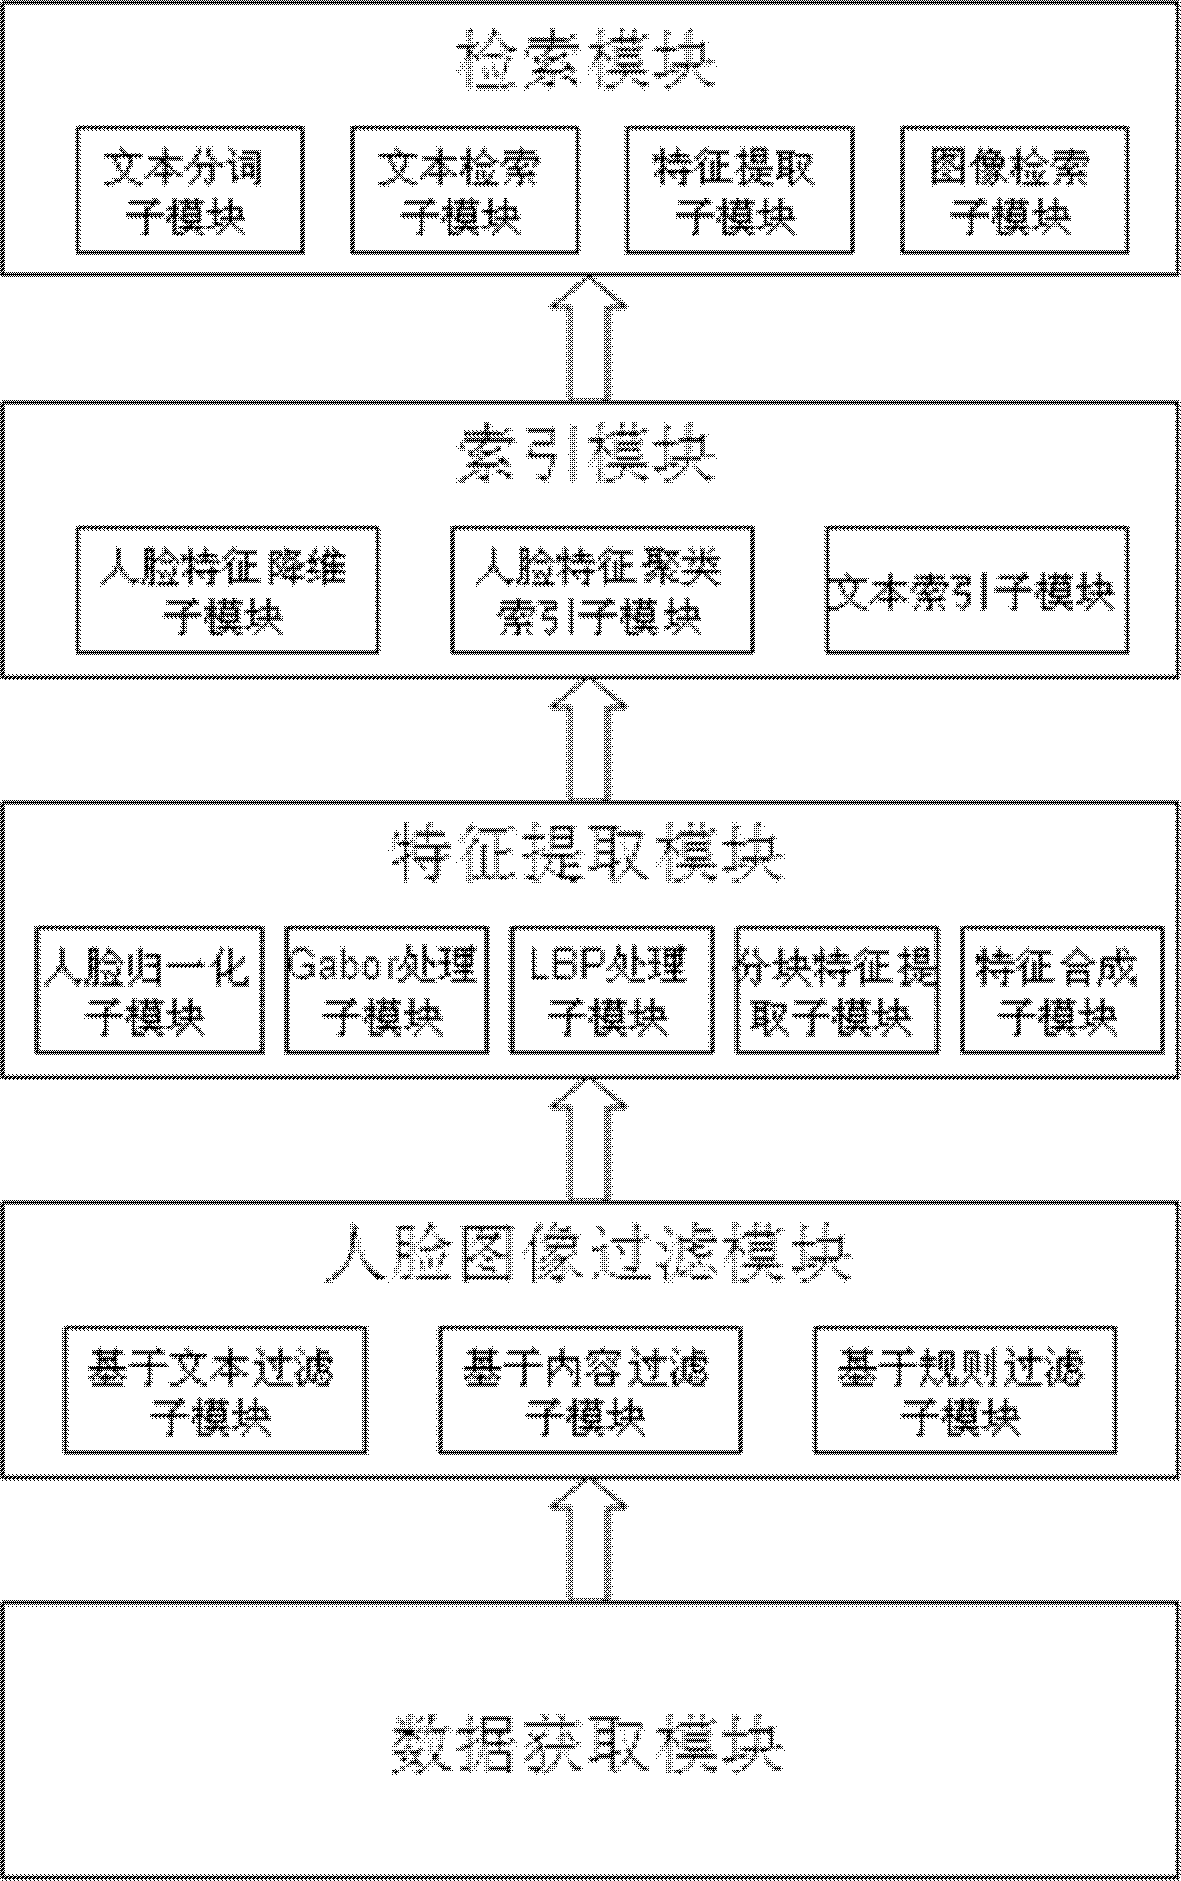 Multi-feature fusion human face image searching method and system